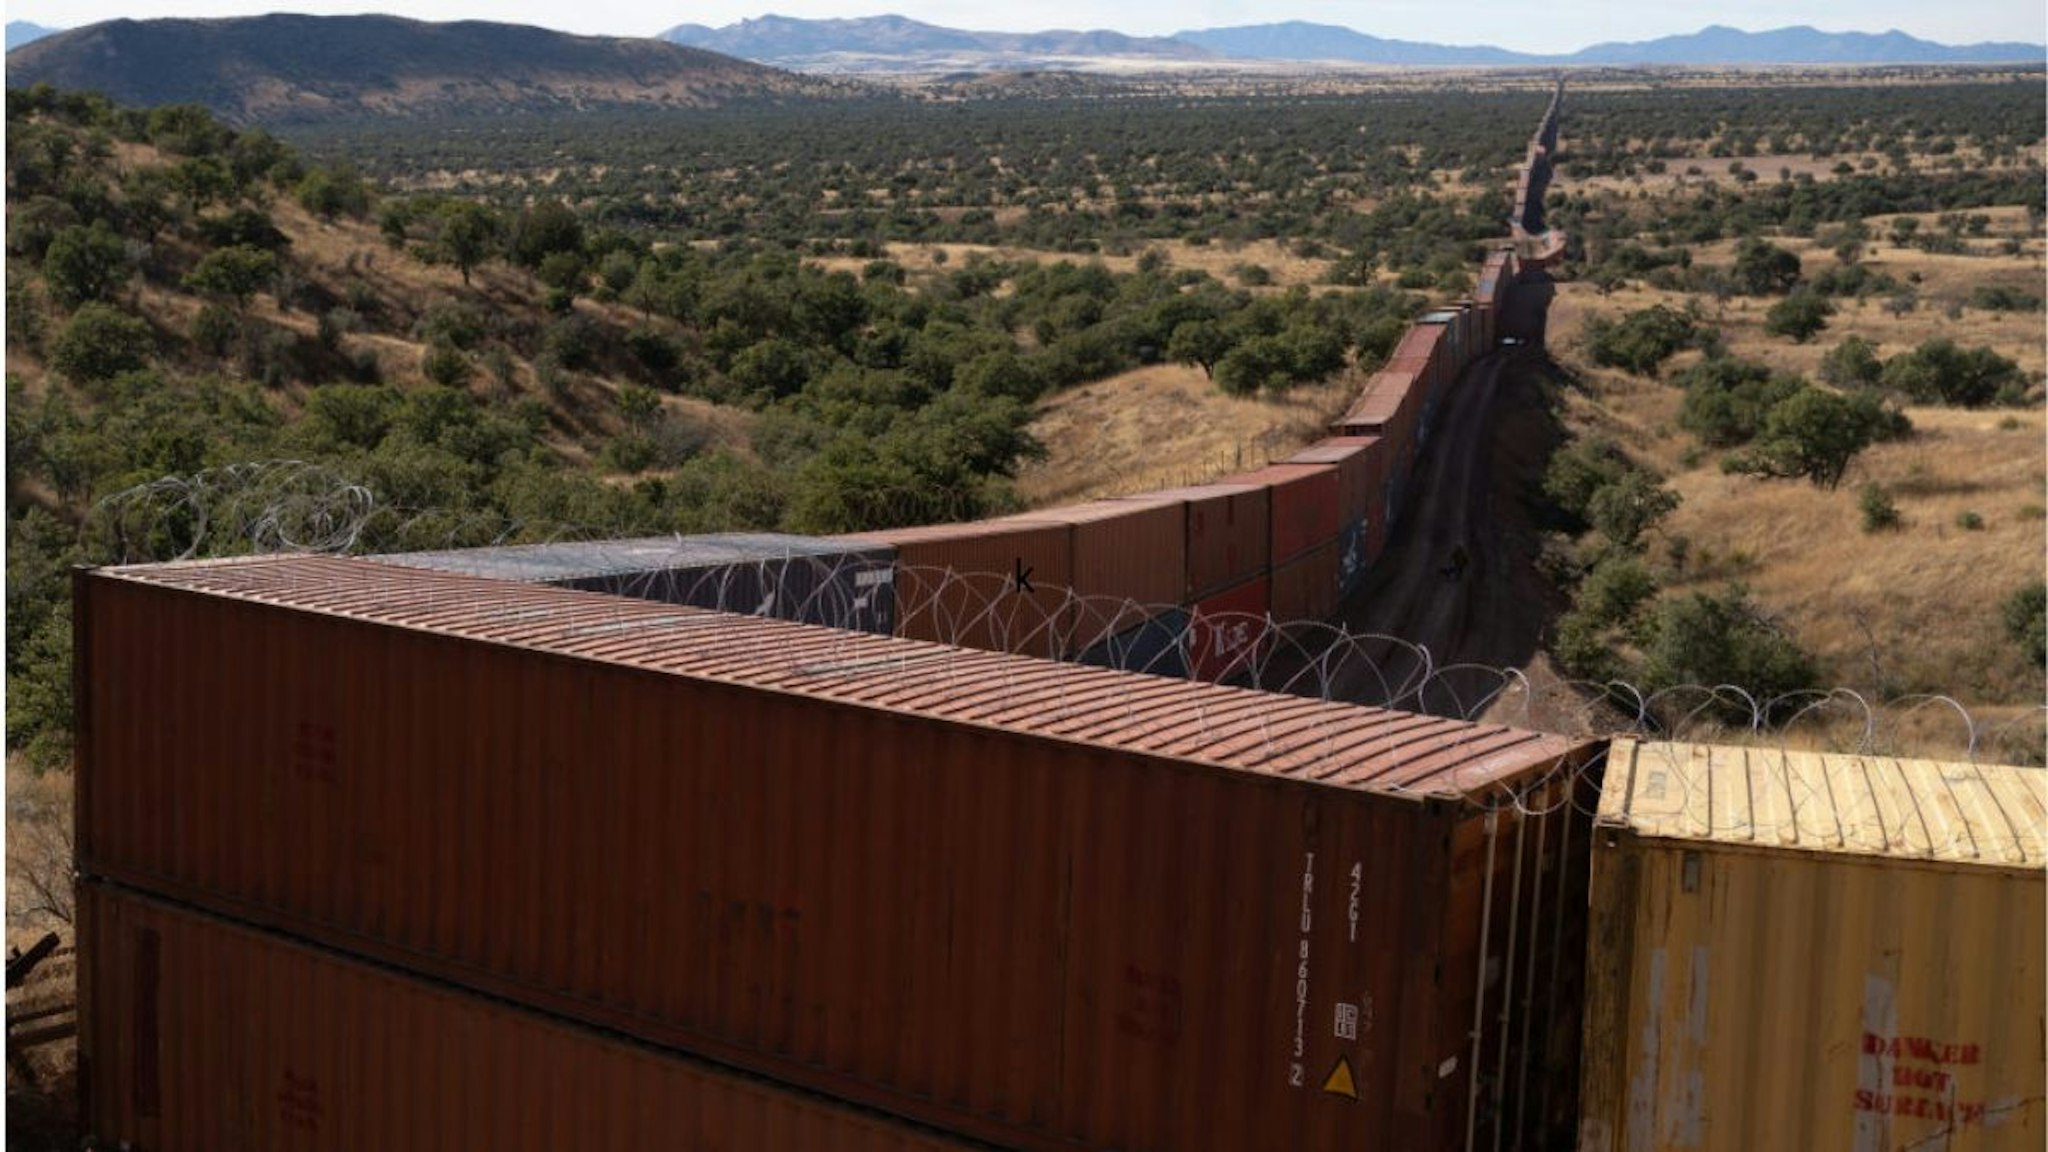 Shipping containers line the US and Mexico Border at Coronado National Memorial in Cochise County, Arizona, US, on Sunday, Dec. 11, 2022.